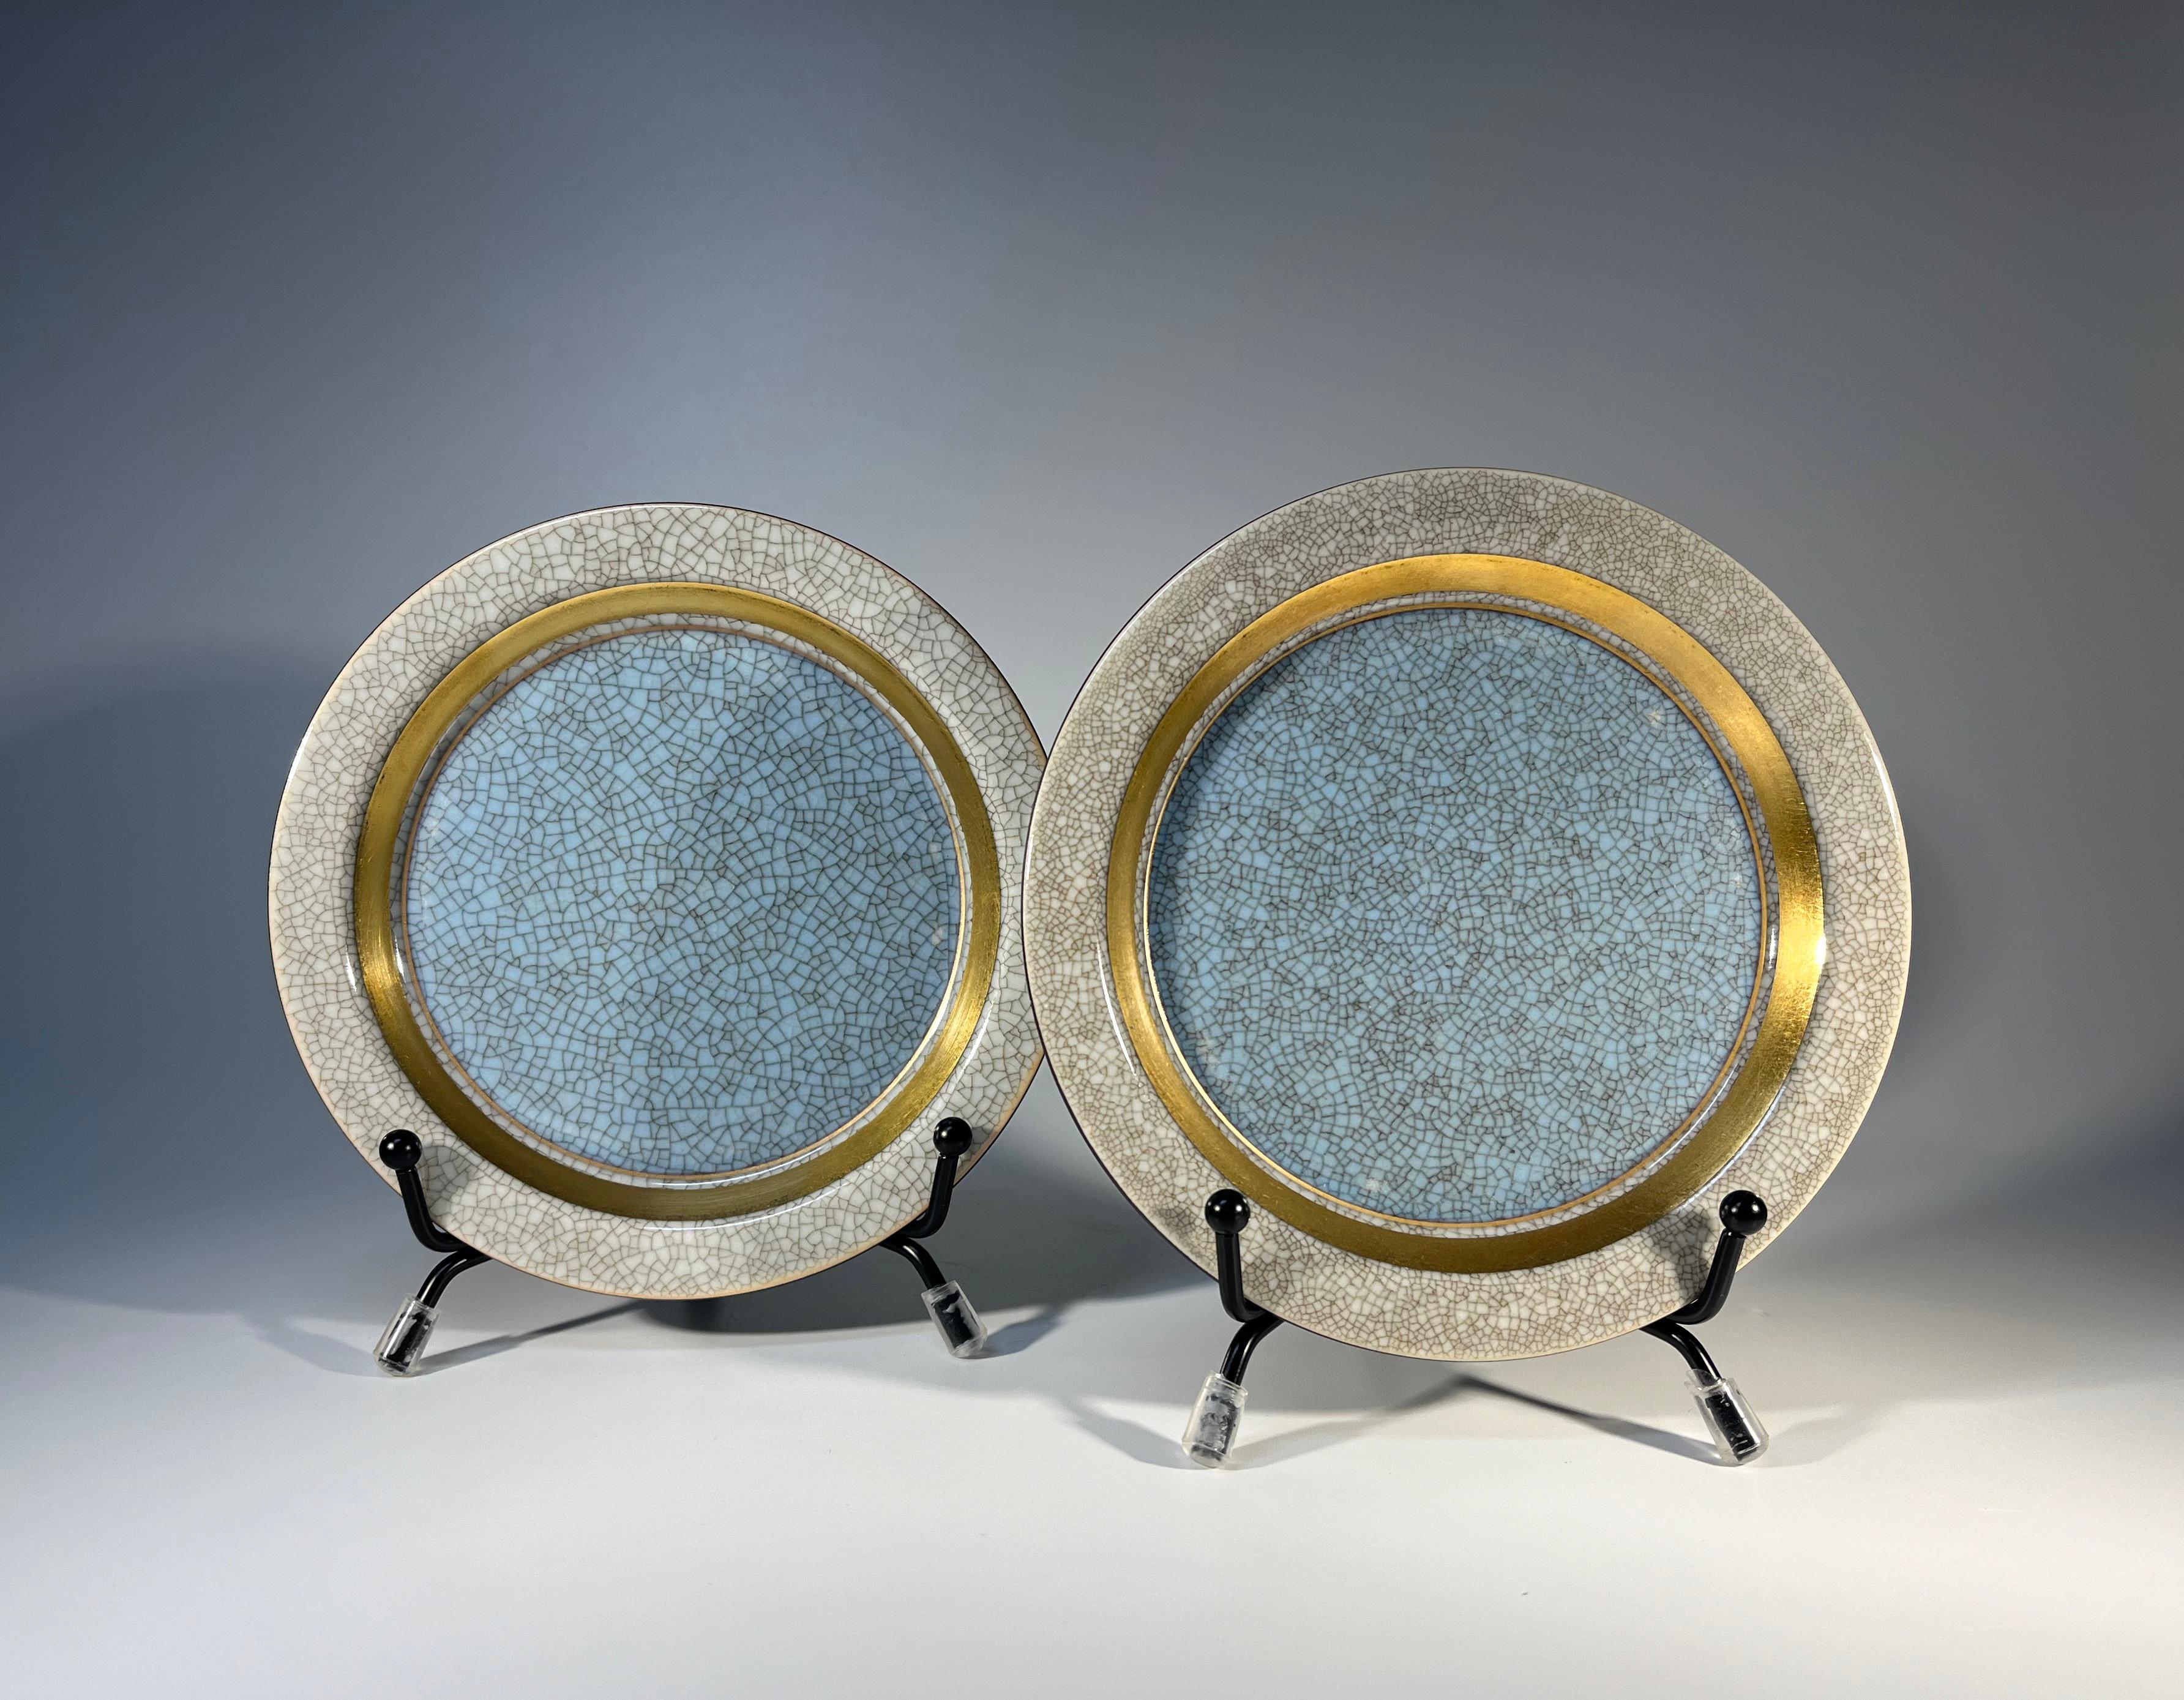 Pair Powder Blue Thorkild Olsen Royal Copenhagen Craquelure Porcelain Trays 3010 In Good Condition For Sale In Rothley, Leicestershire